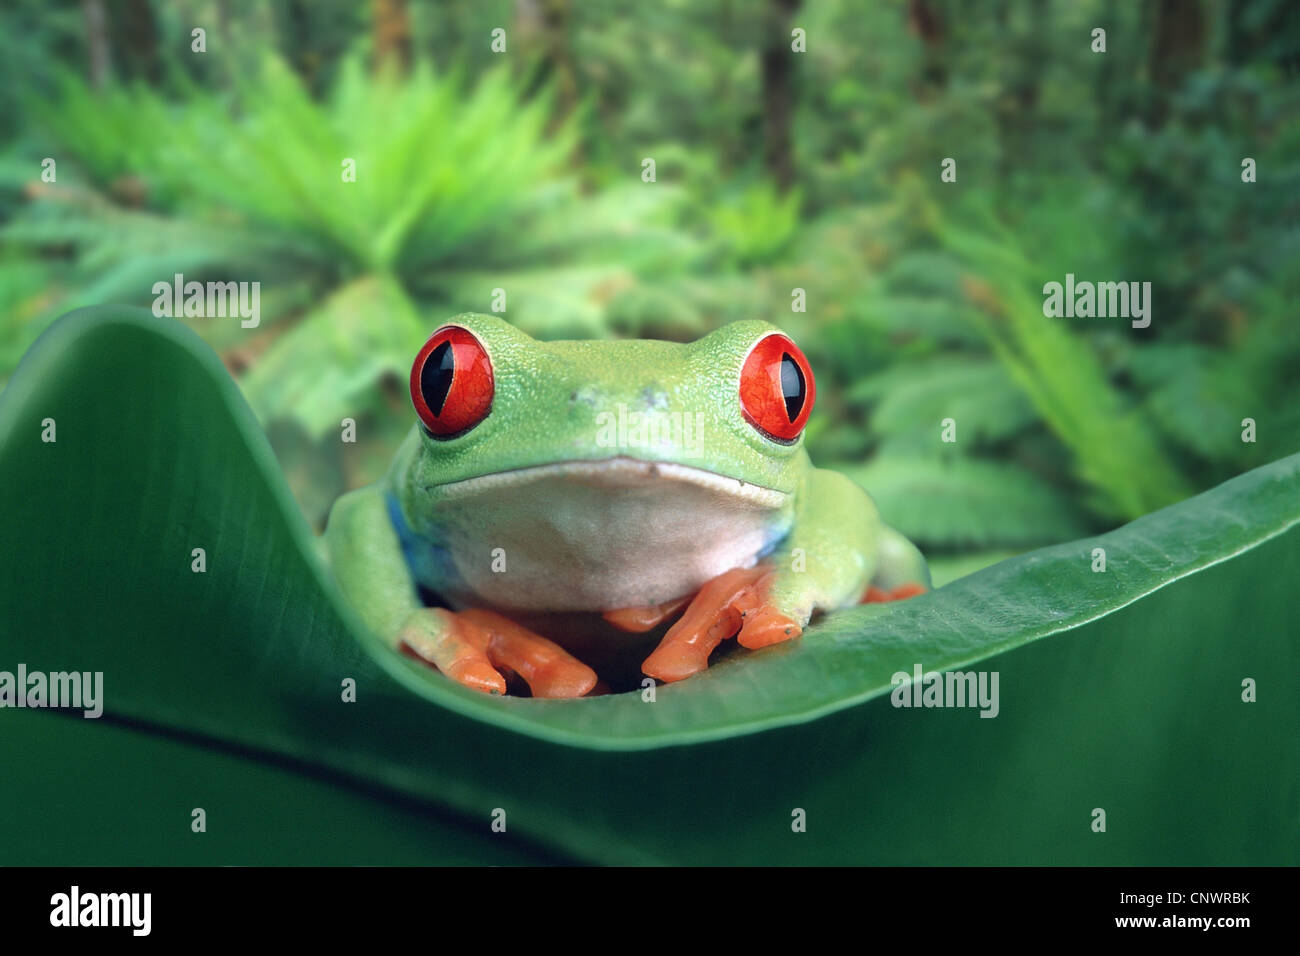 red-eyed treefrog, redeyed treefrog, redeye treefrog, red eye treefrog, red eyed frog (Agalychnis callidryas), sitting on a leaf in the rain forest Stock Photo